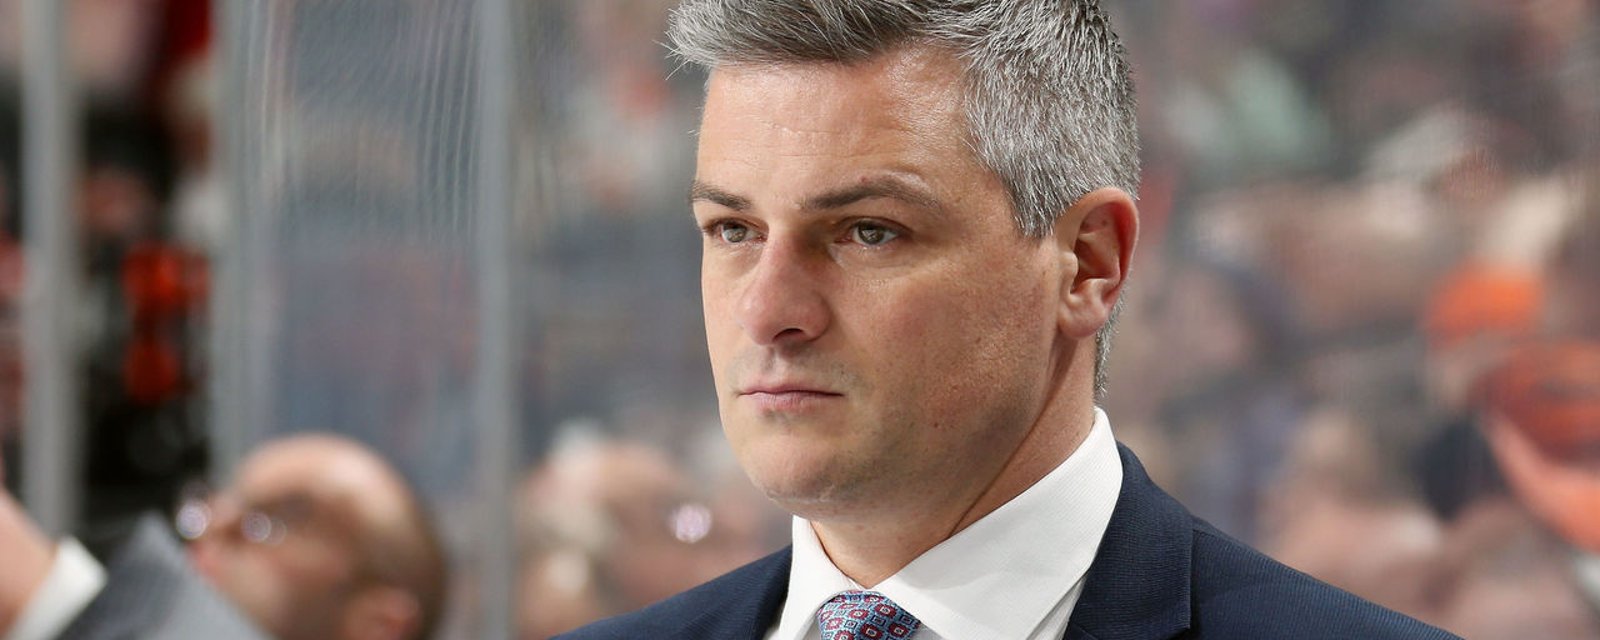 Sheldon Keefe may have something special planned for the Ottawa Senators.